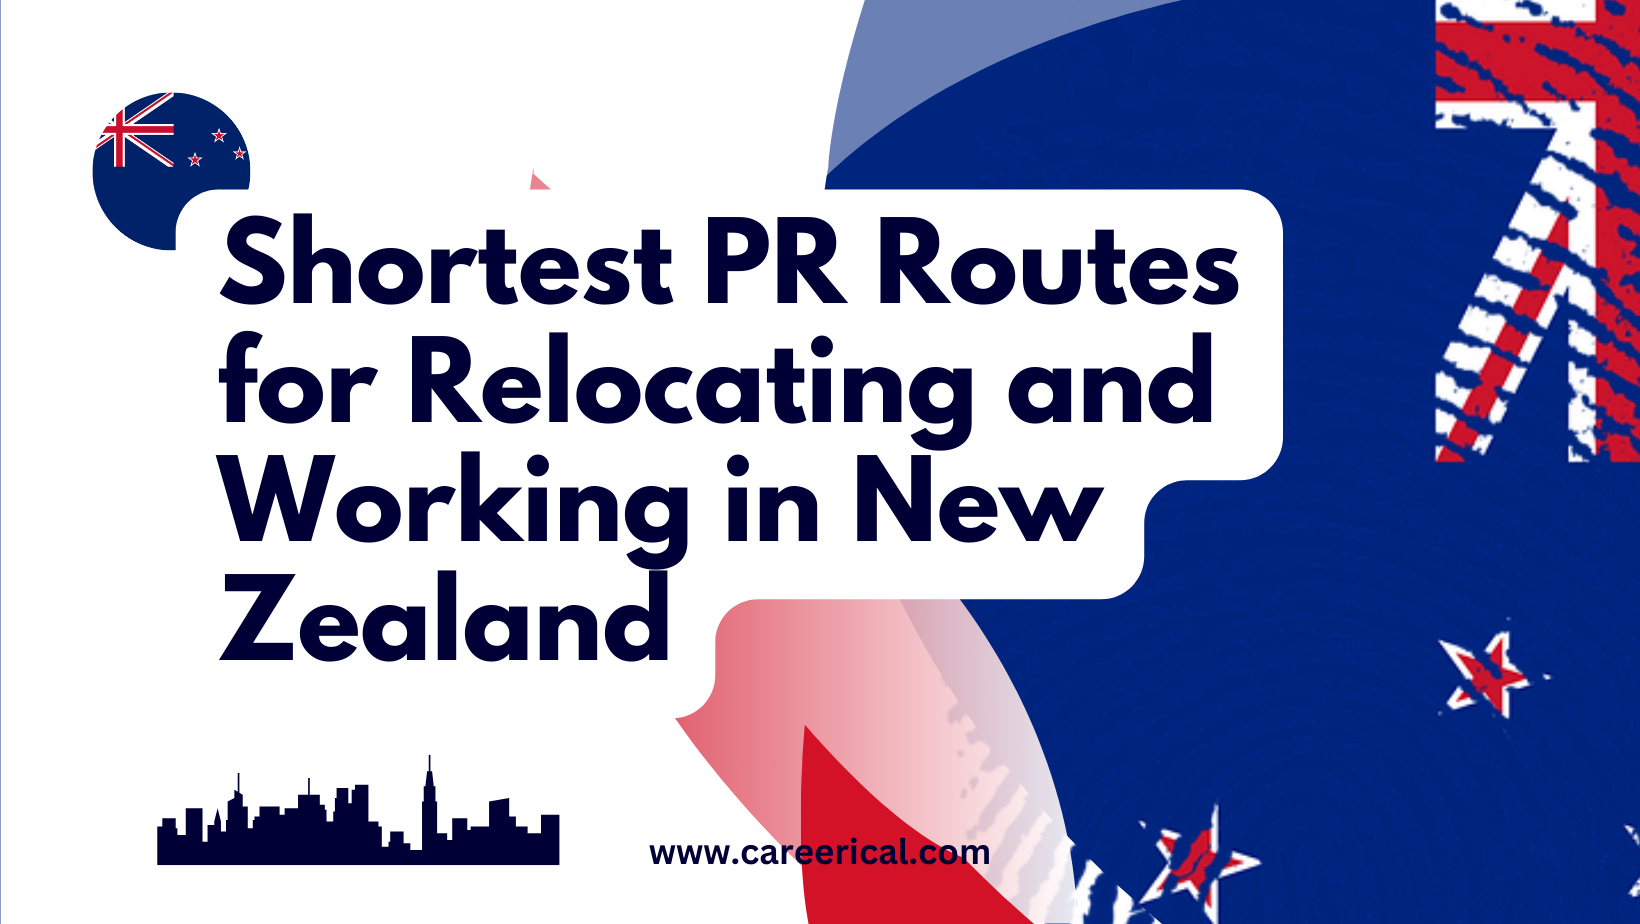 Shortest PR Routes for Relocating and Working in New Zealand